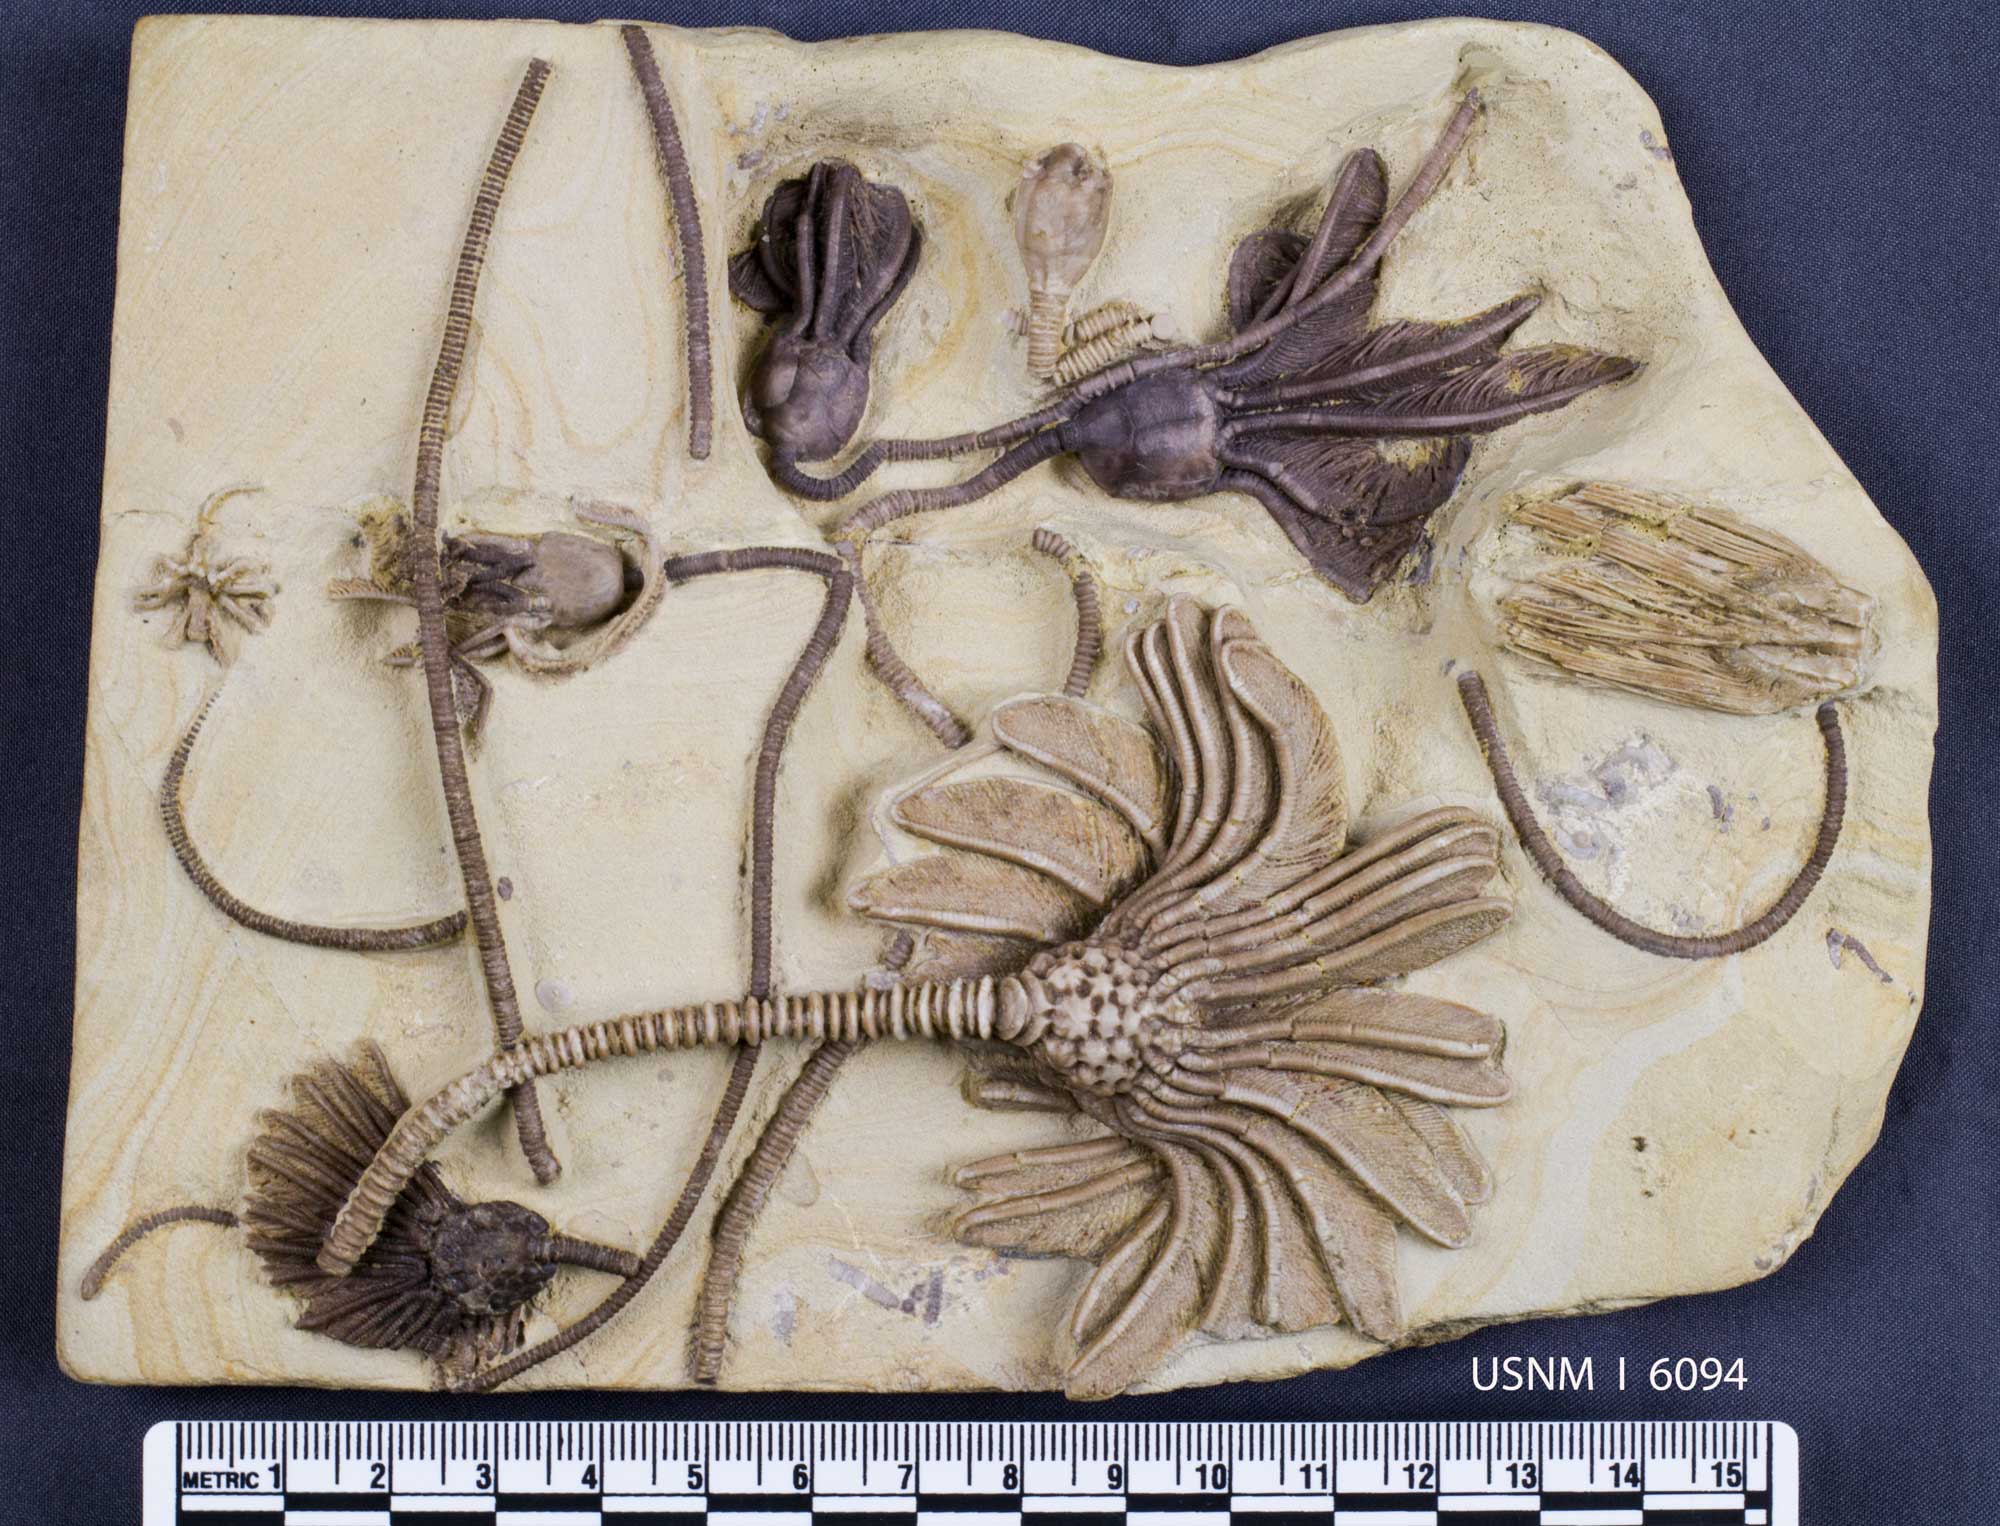 Photograph of a slab of crinoid fossils from the Mississippian of Iowa. The photo shows a light beige slab of rock with multiple crinoids exposed on its surface. Some of the specimens include a stalk, calyx, and arms. At least 10 specimens appear to be on the slab.